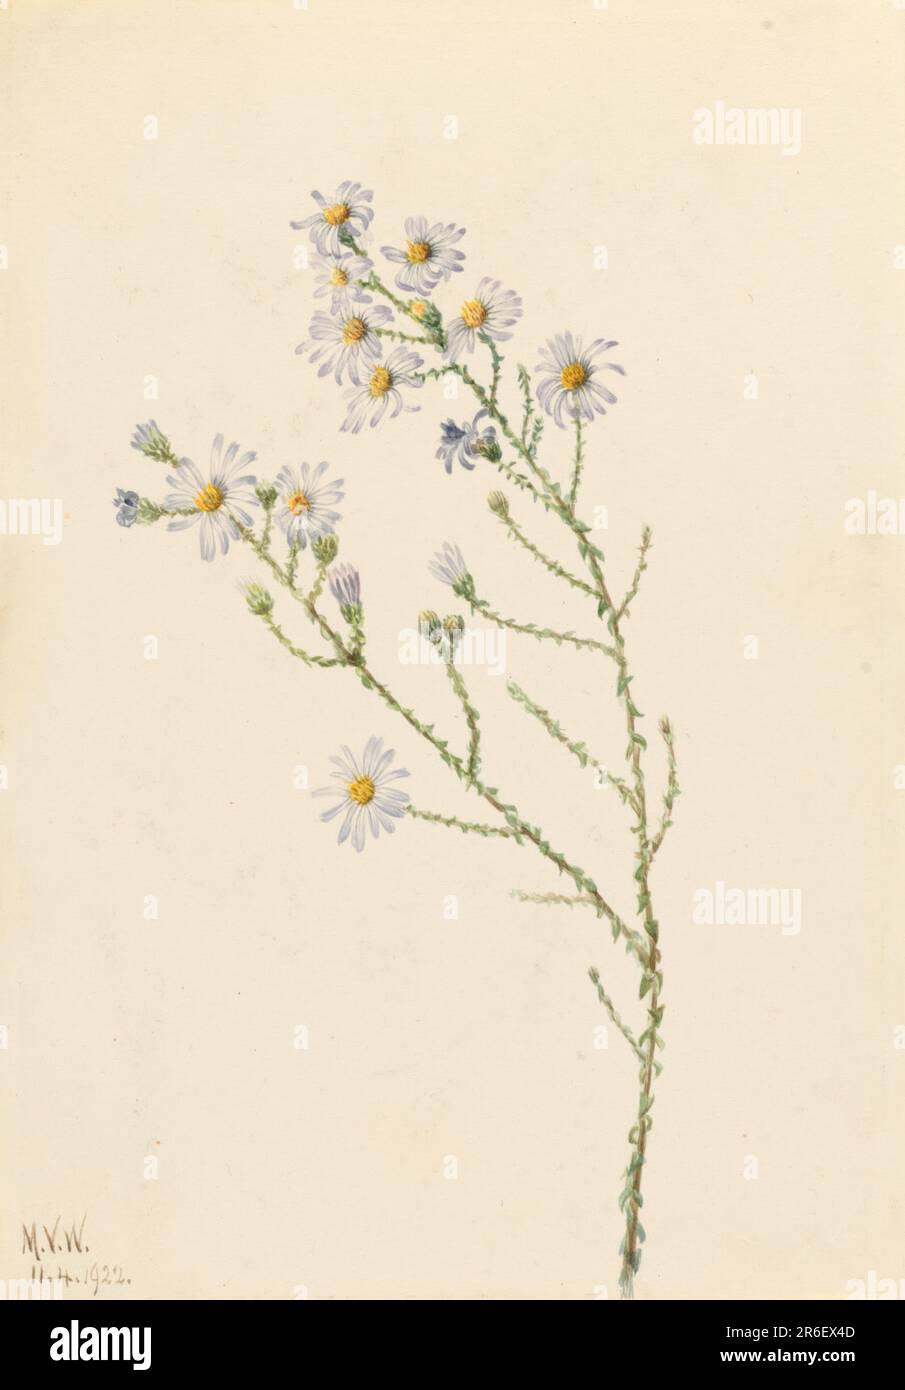 Pineland Aster (Aster squarrosus). Date: 1922. Watercolor on paper. Museum: Smithsonian American Art Museum. Stock Photo